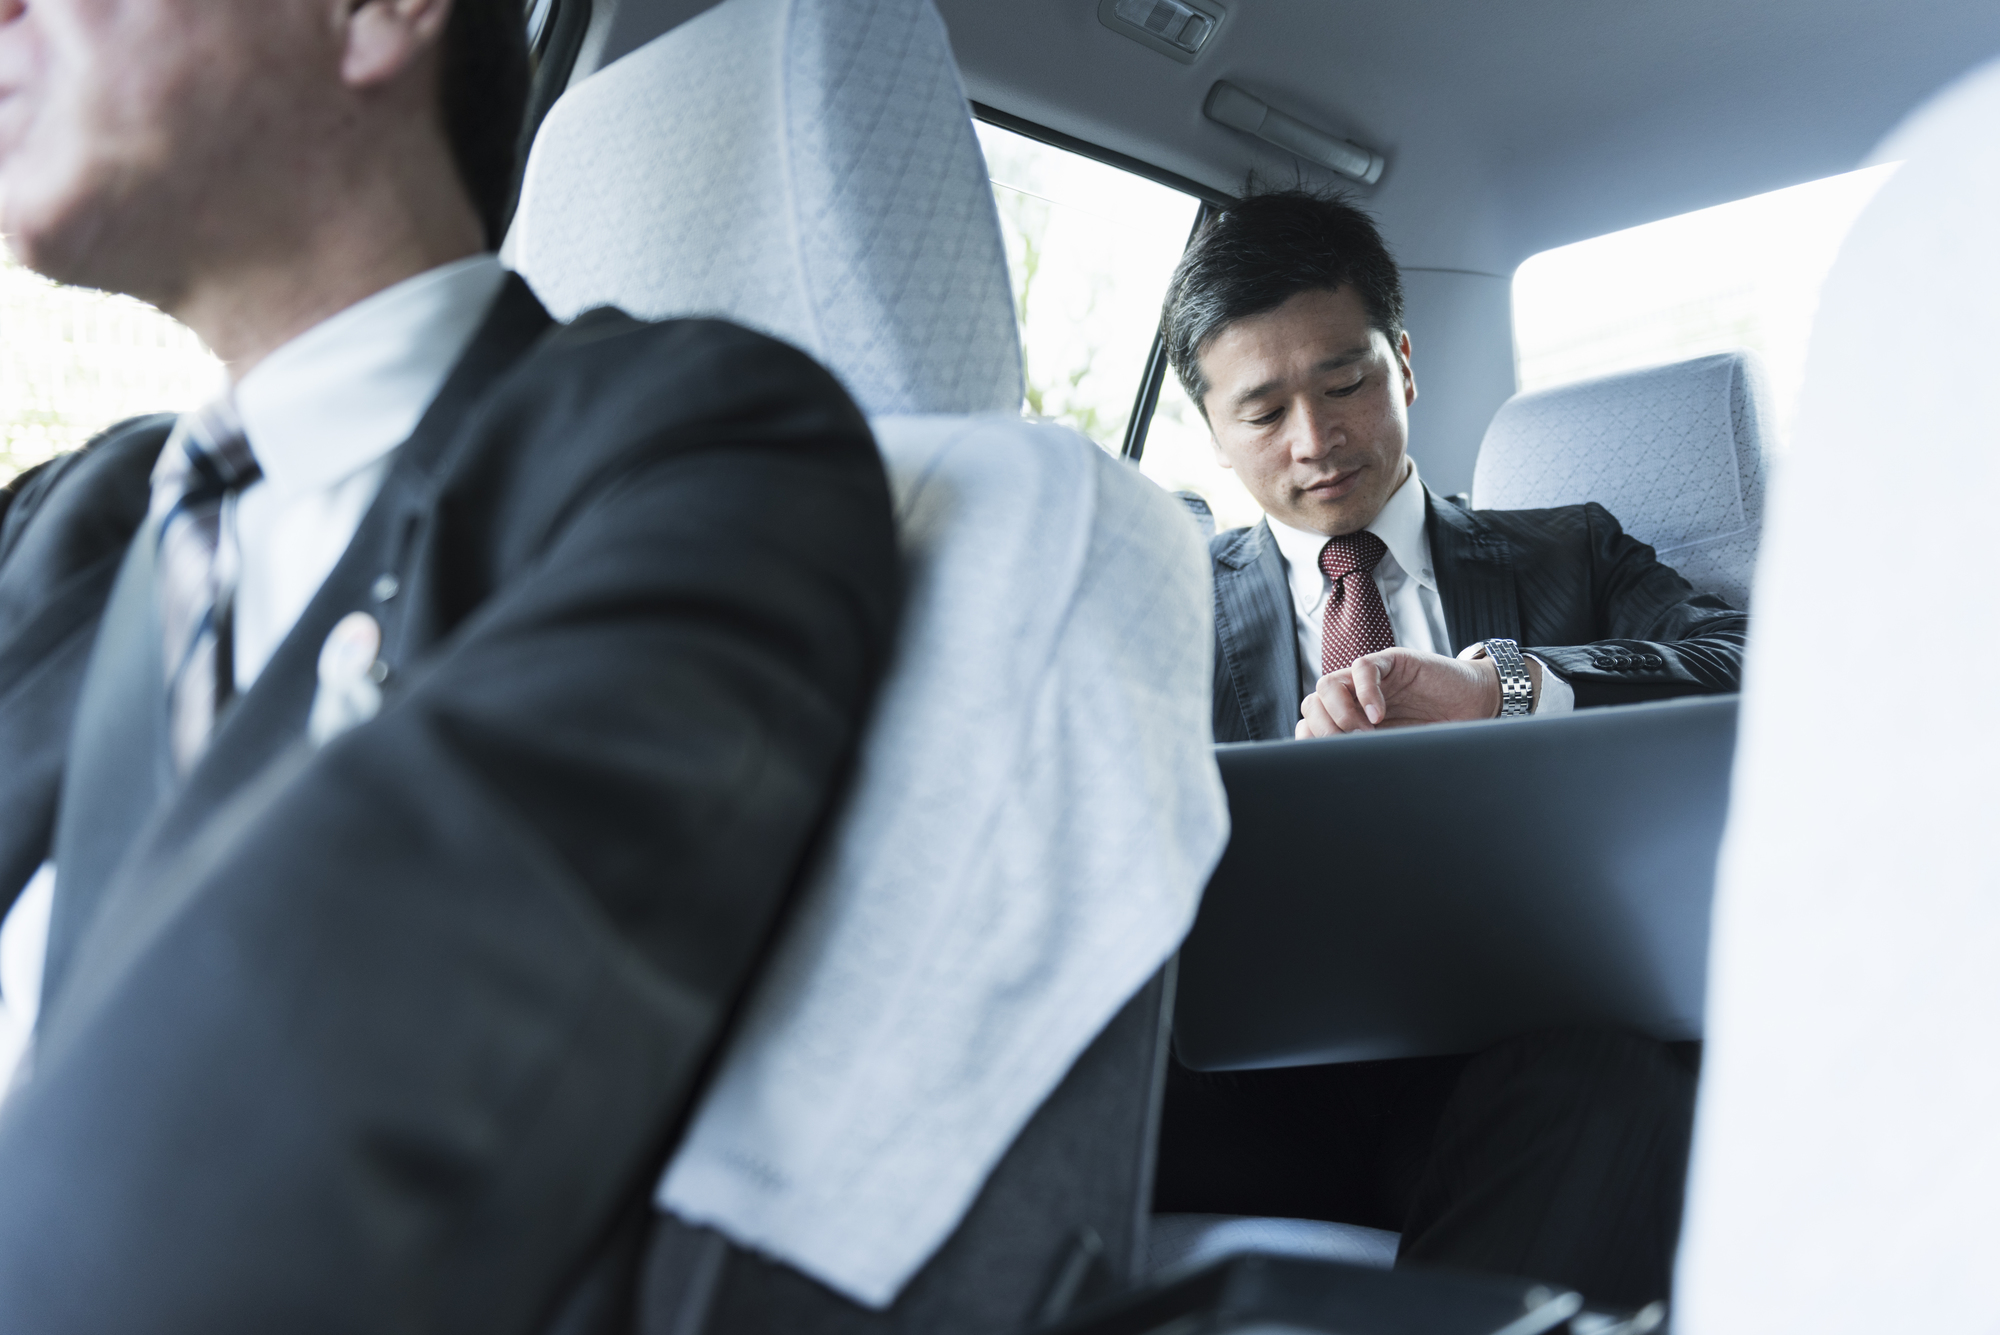 ■I want to ride in a car with a driver to help my work go smoothly! What are the benefits?